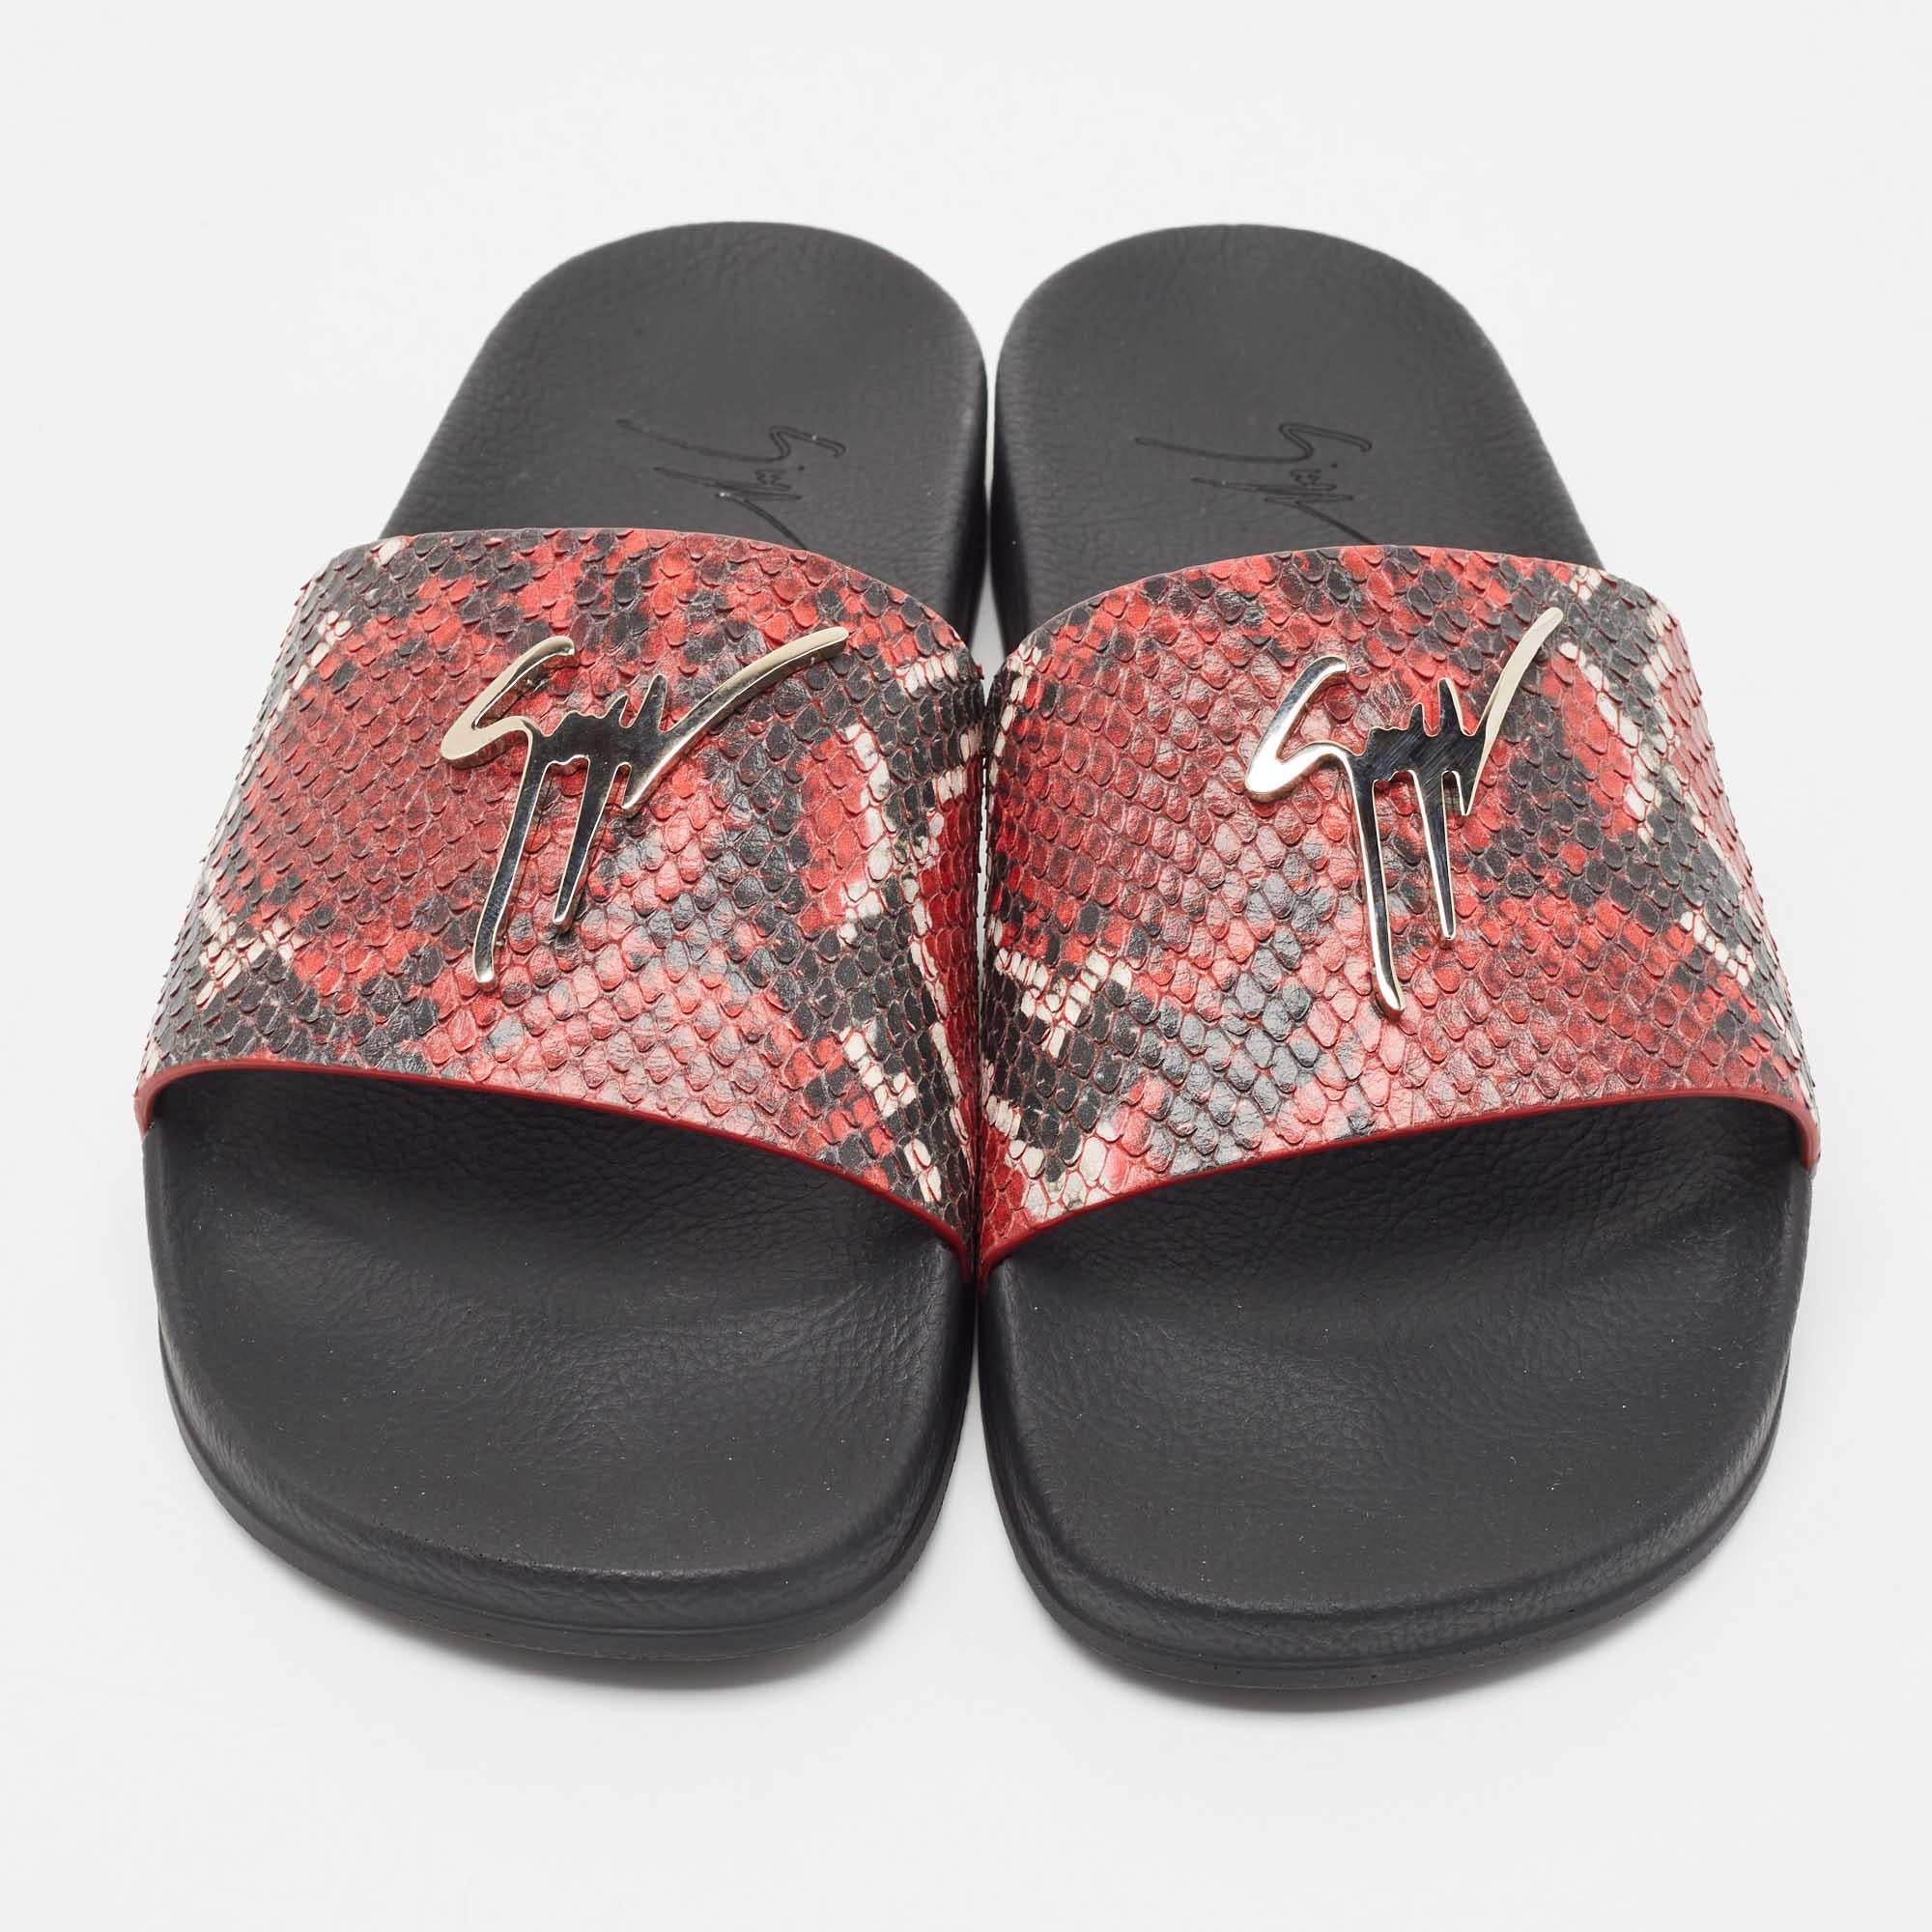 Giuseppe Zanotti's rubber slides for men have notable branding on the python-embossed leather uppers. They're perfect for the beach, vacation days, or everyday use.

Includes: Original Dustbag, Original Box, Info Card